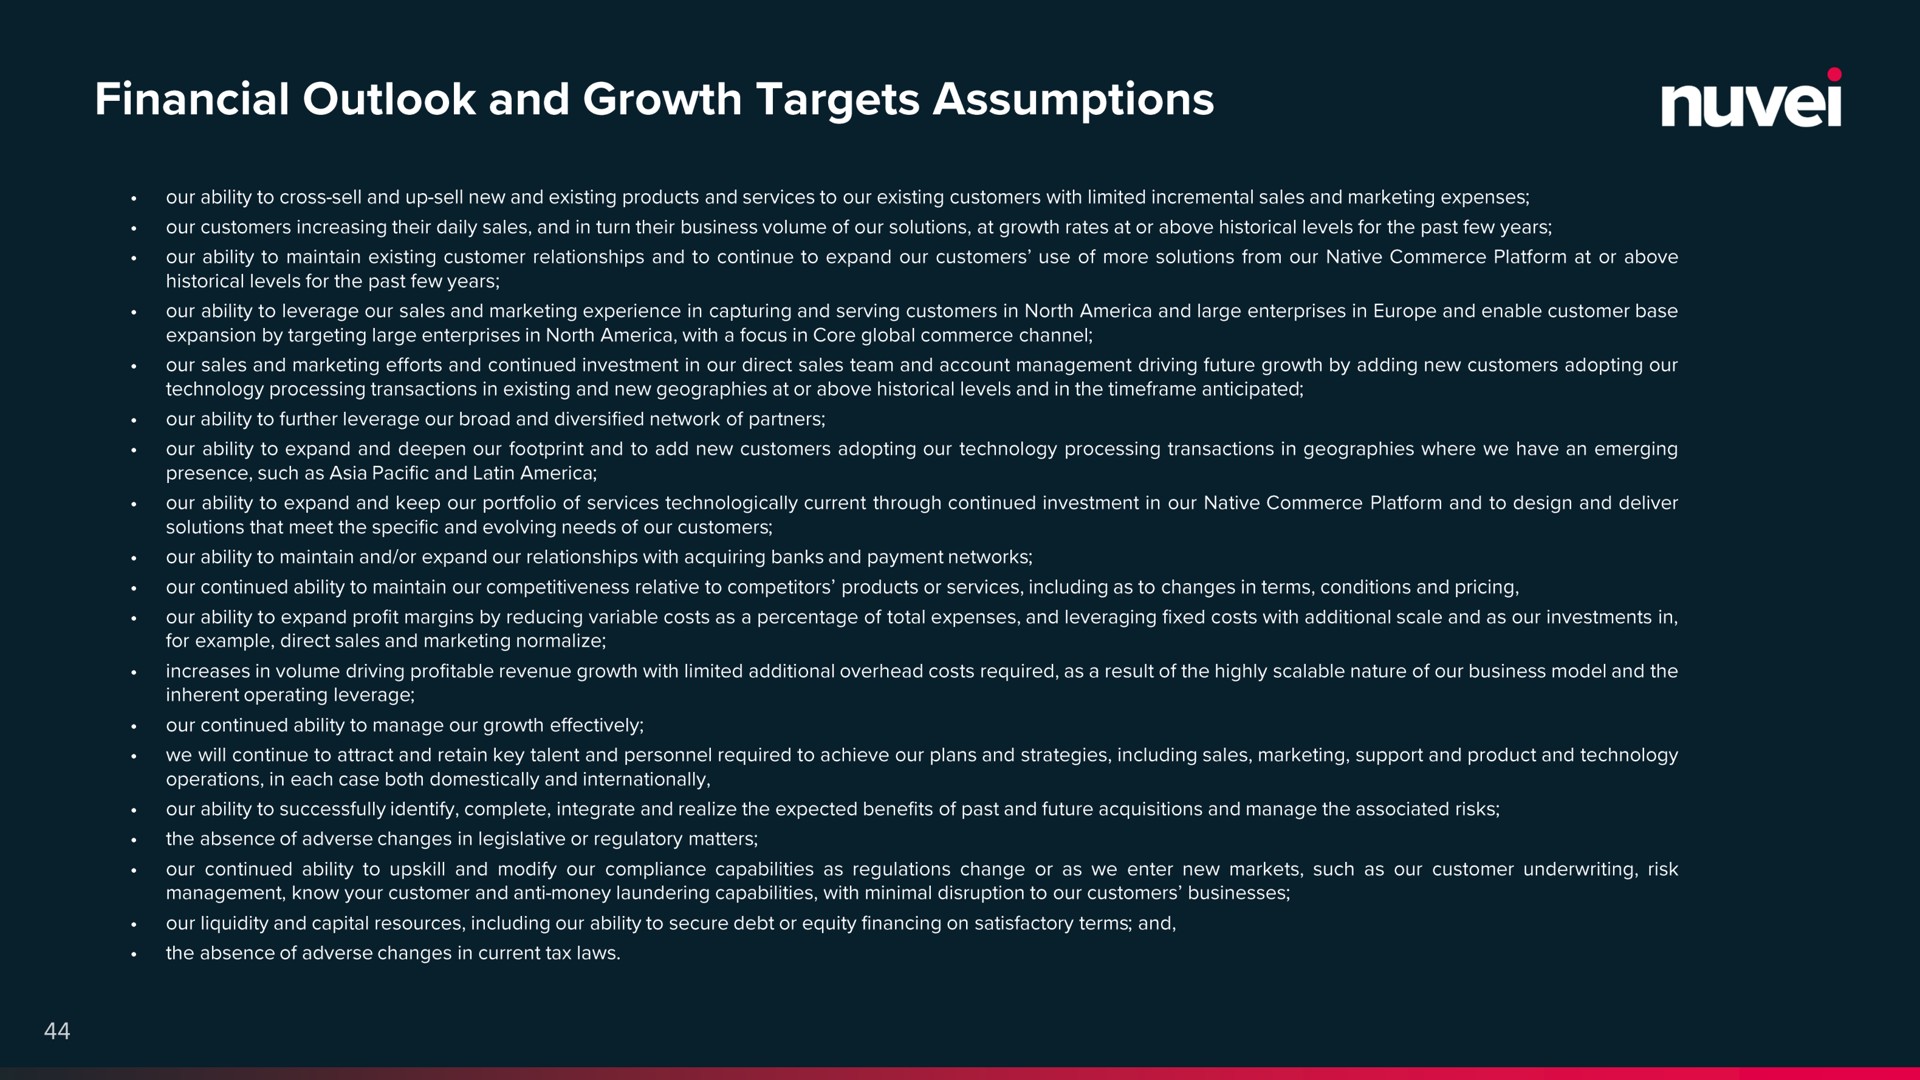 financial outlook and growth targets assumptions | Nuvei